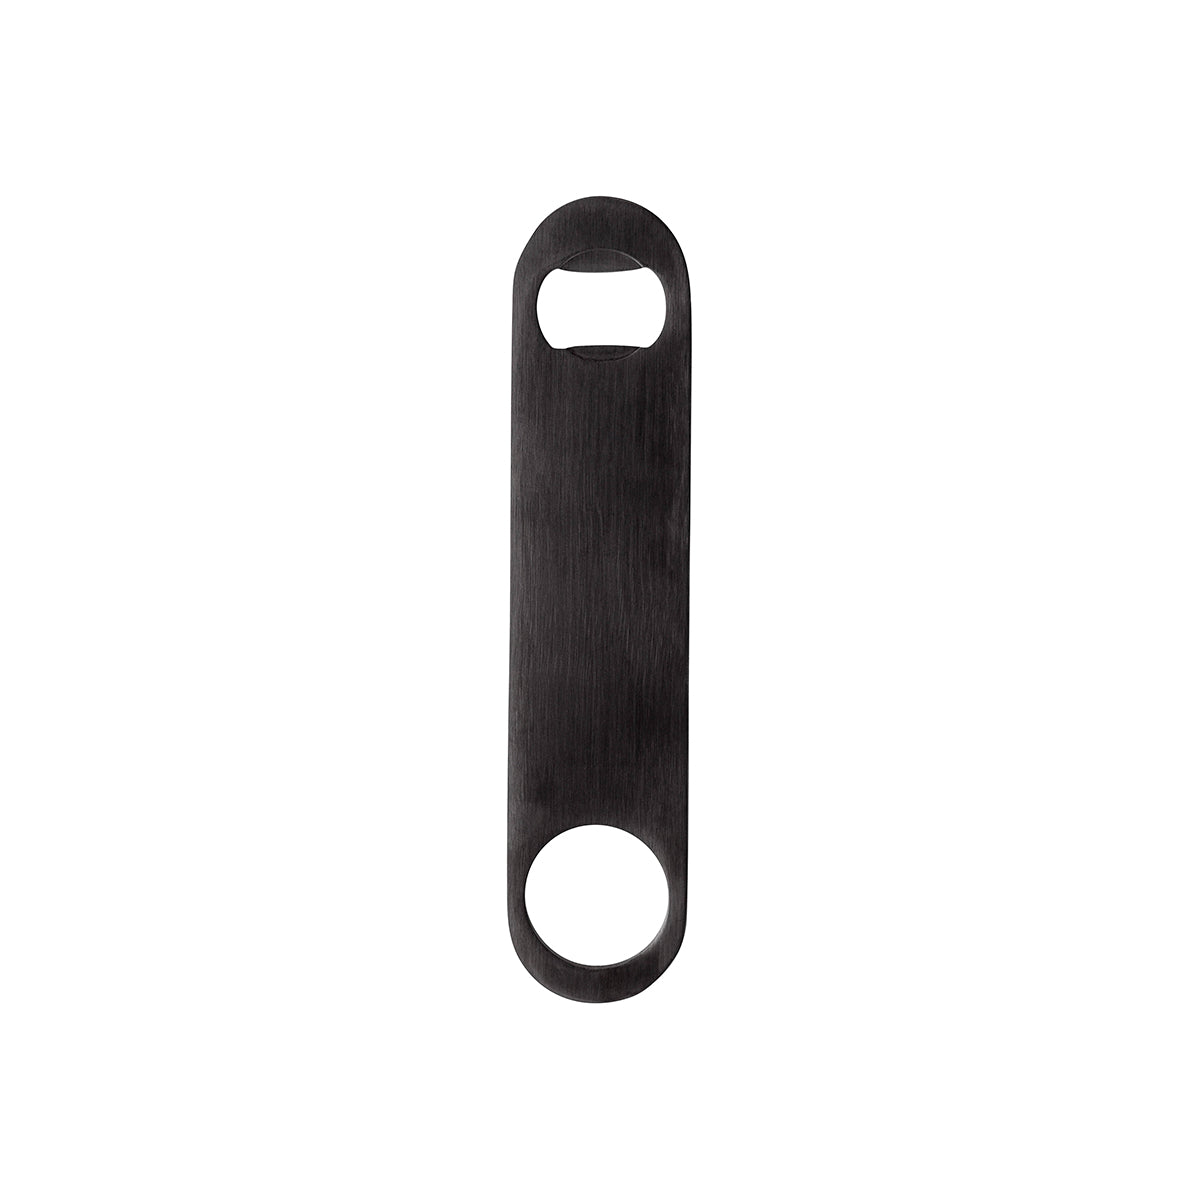 Bar Blade - 180mm, Black Moda from Moda. Sold in boxes of 1. Hospitality quality at wholesale price with The Flying Fork! 